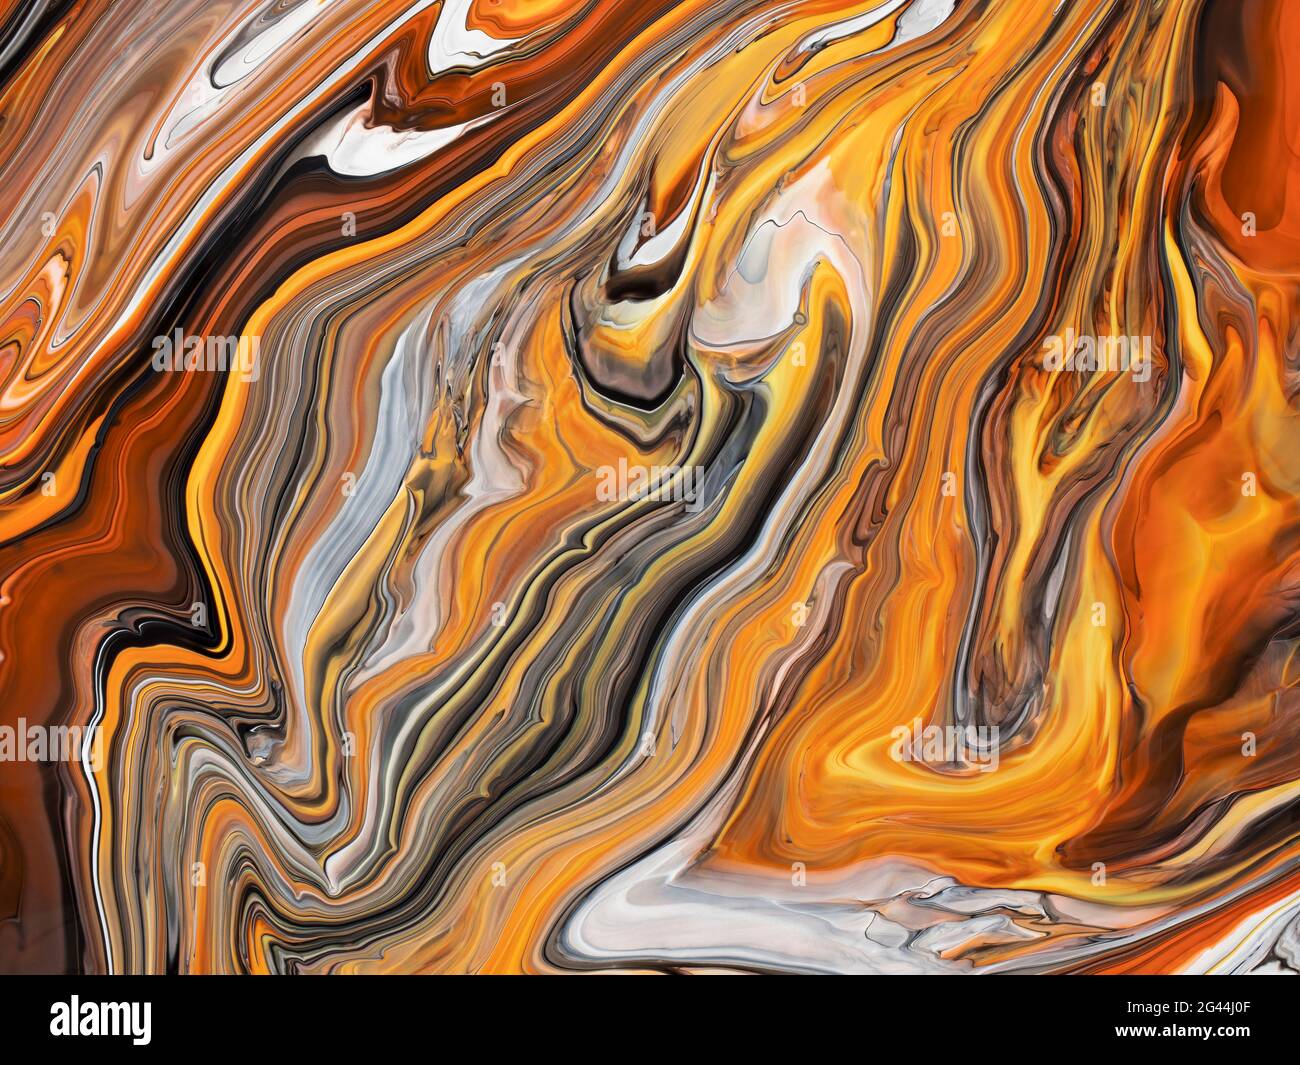 Abstract image of mixed colors of acrylic paint Stock Photo